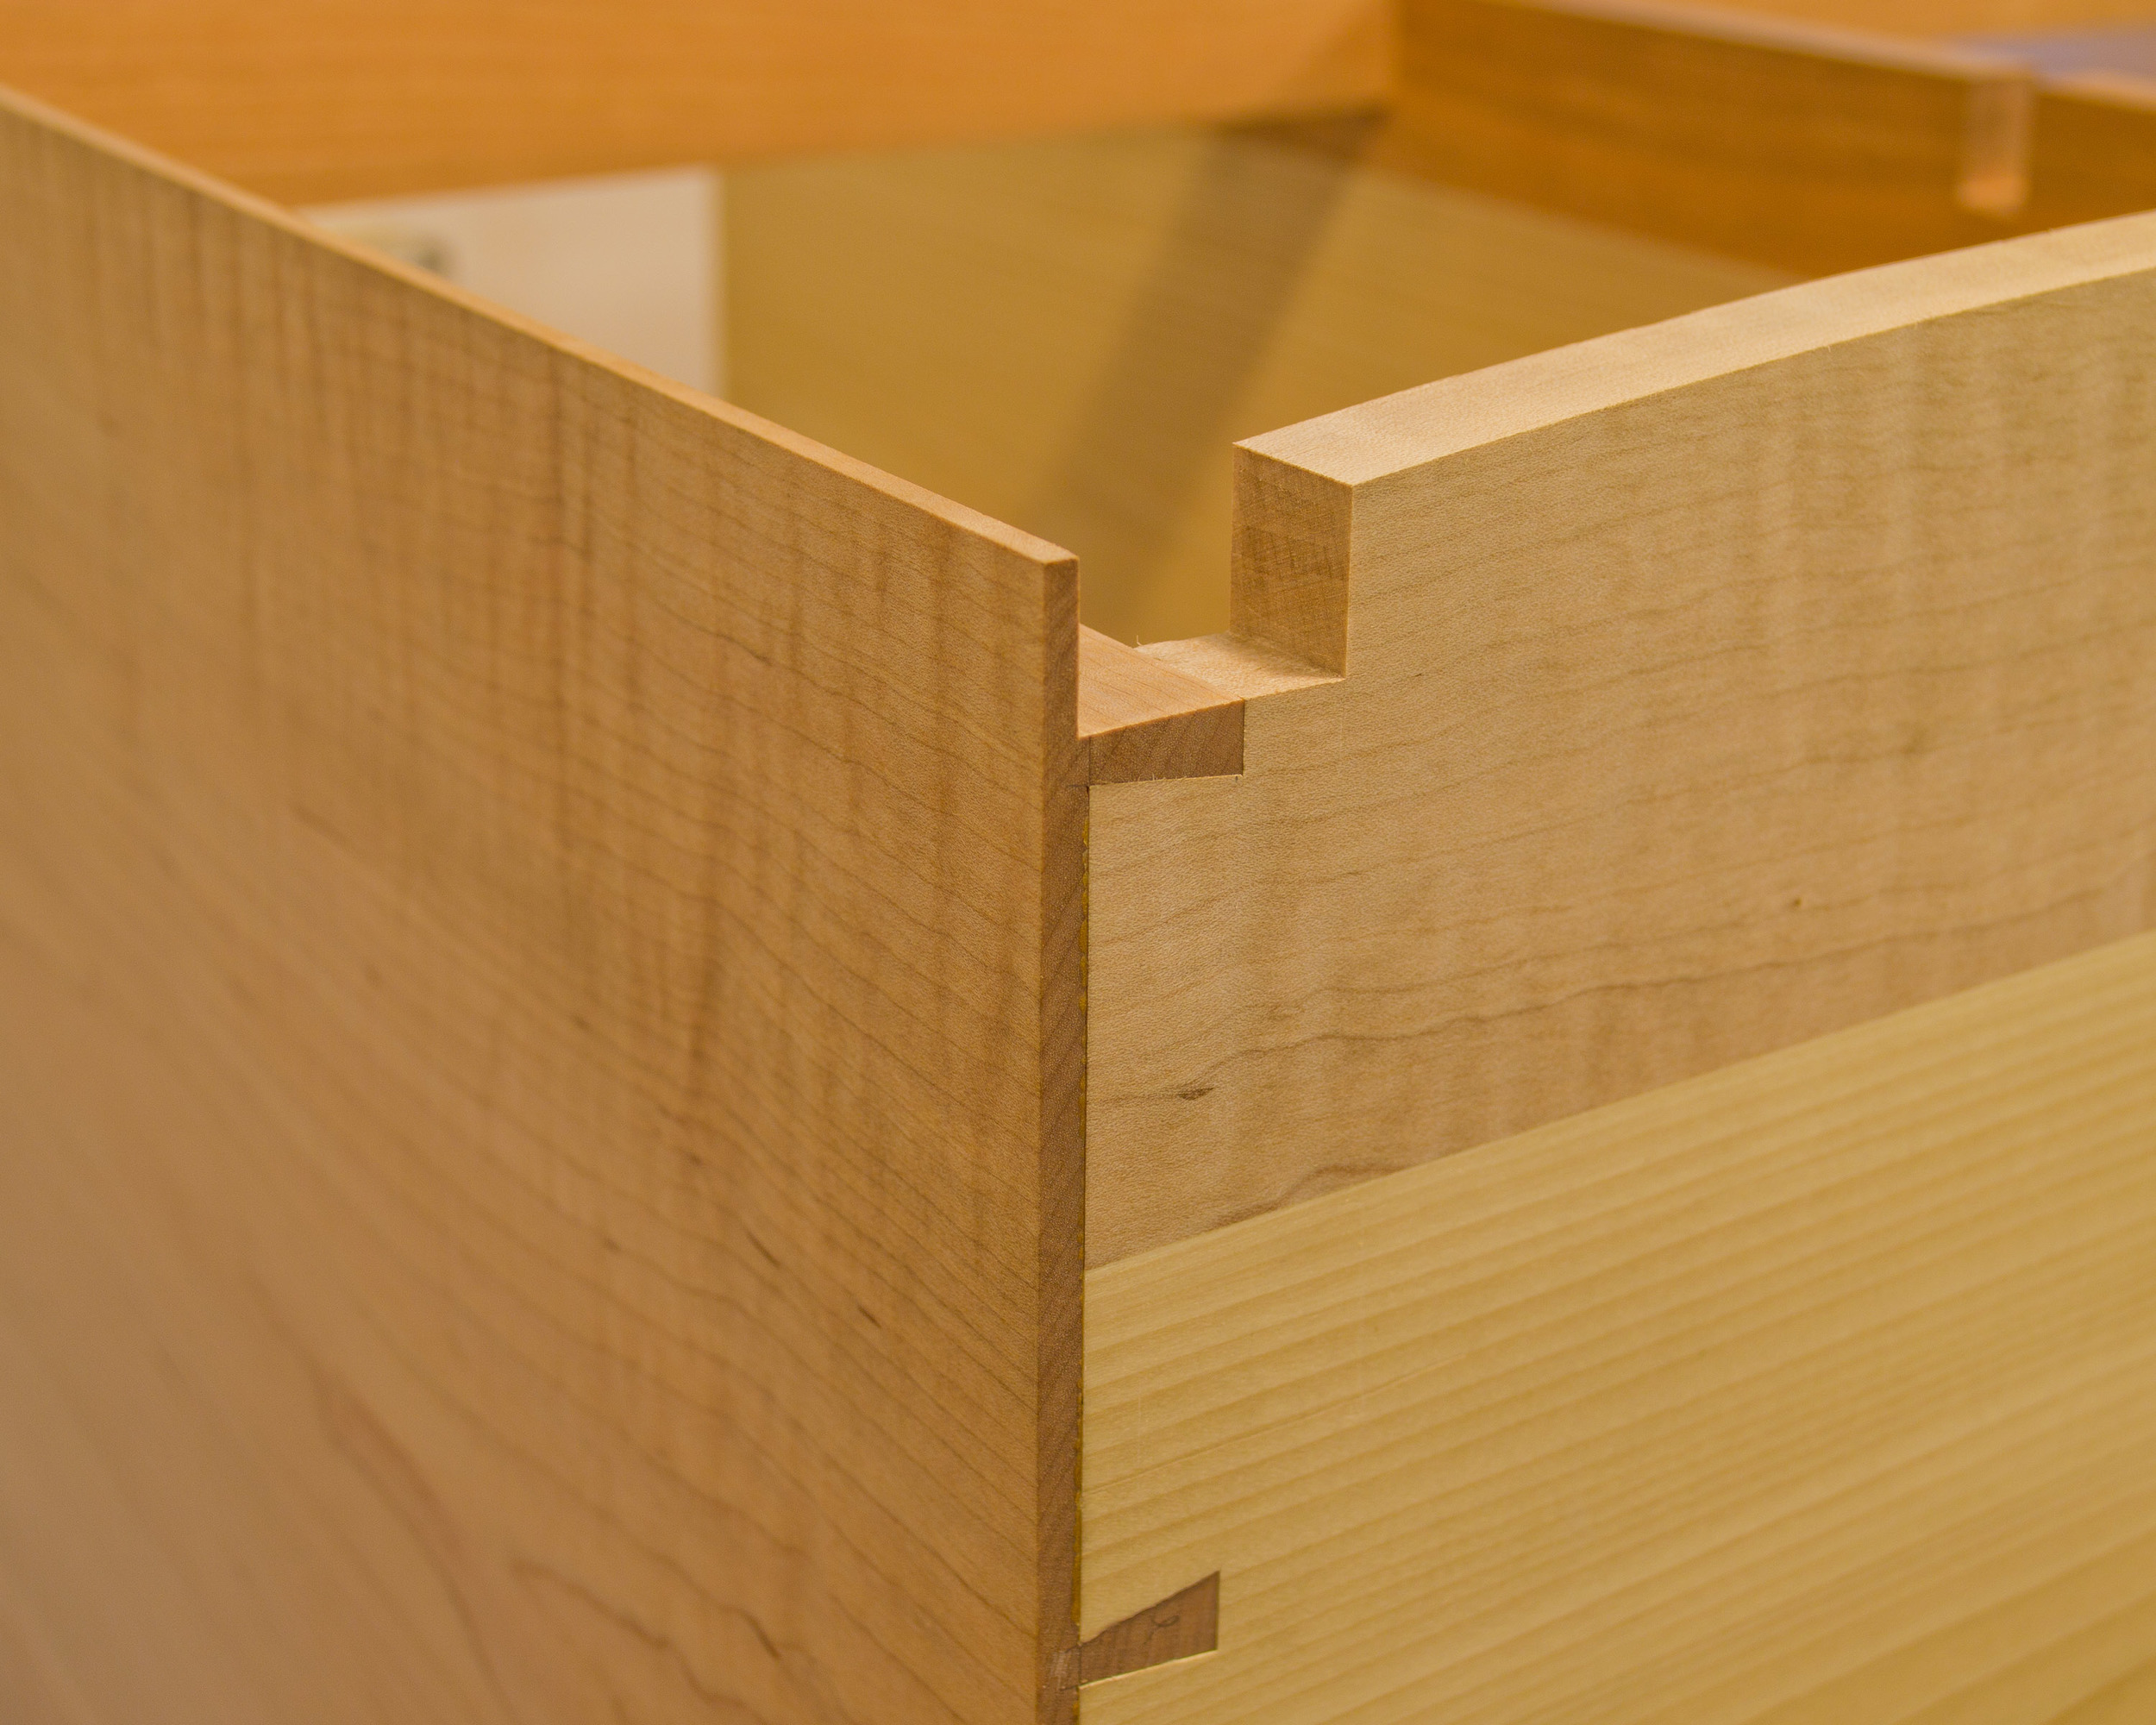  Dovetails, again. &nbsp;You can also see the rabbet on the front of the side which will accept a vertical stile. 